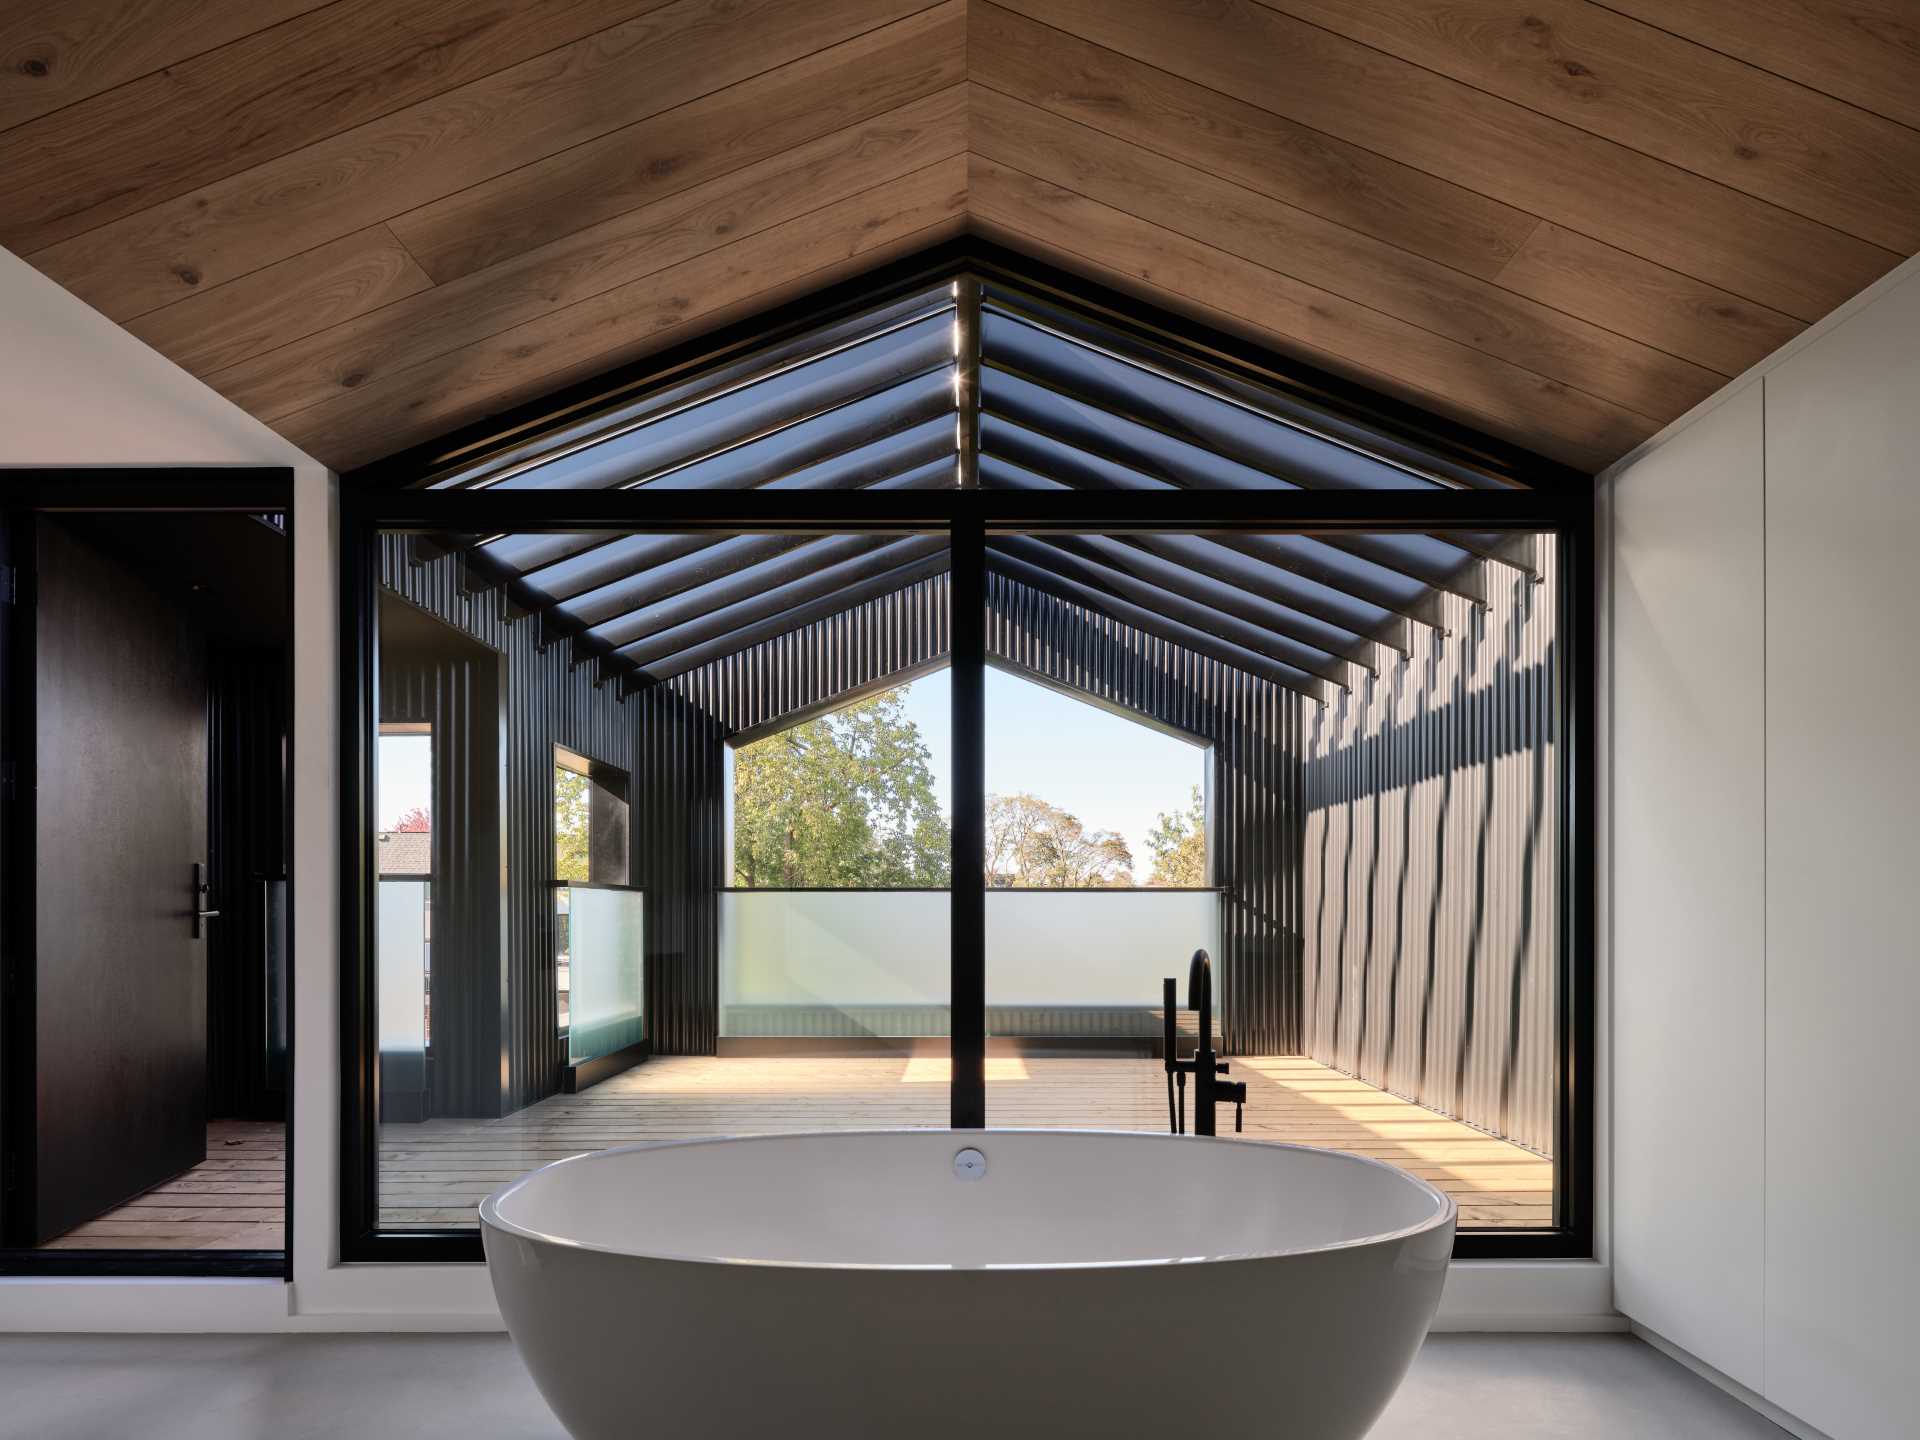 A modern bathroom with a freestanding bathtub opens to a private deck.